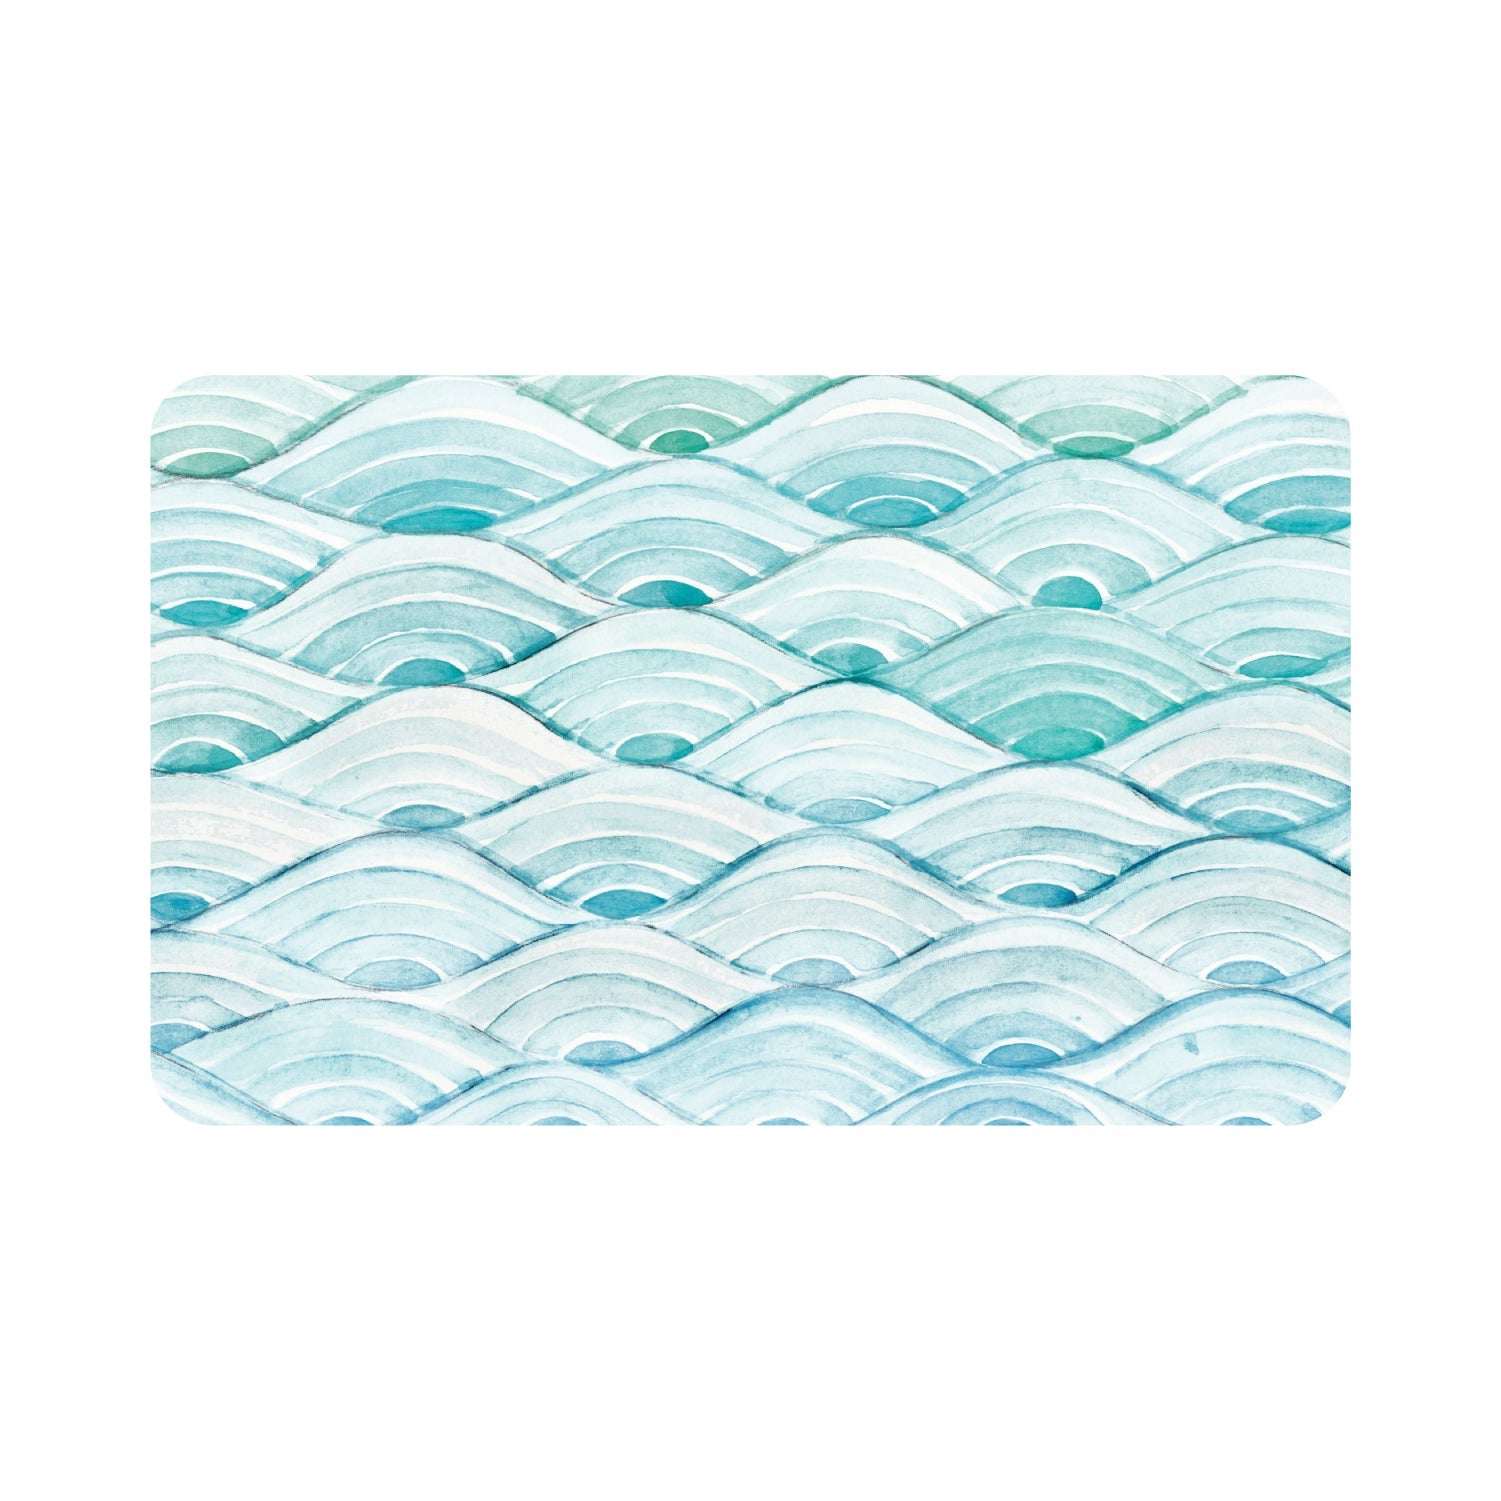 Prints Series Mouse Pad, Watercolor Waves